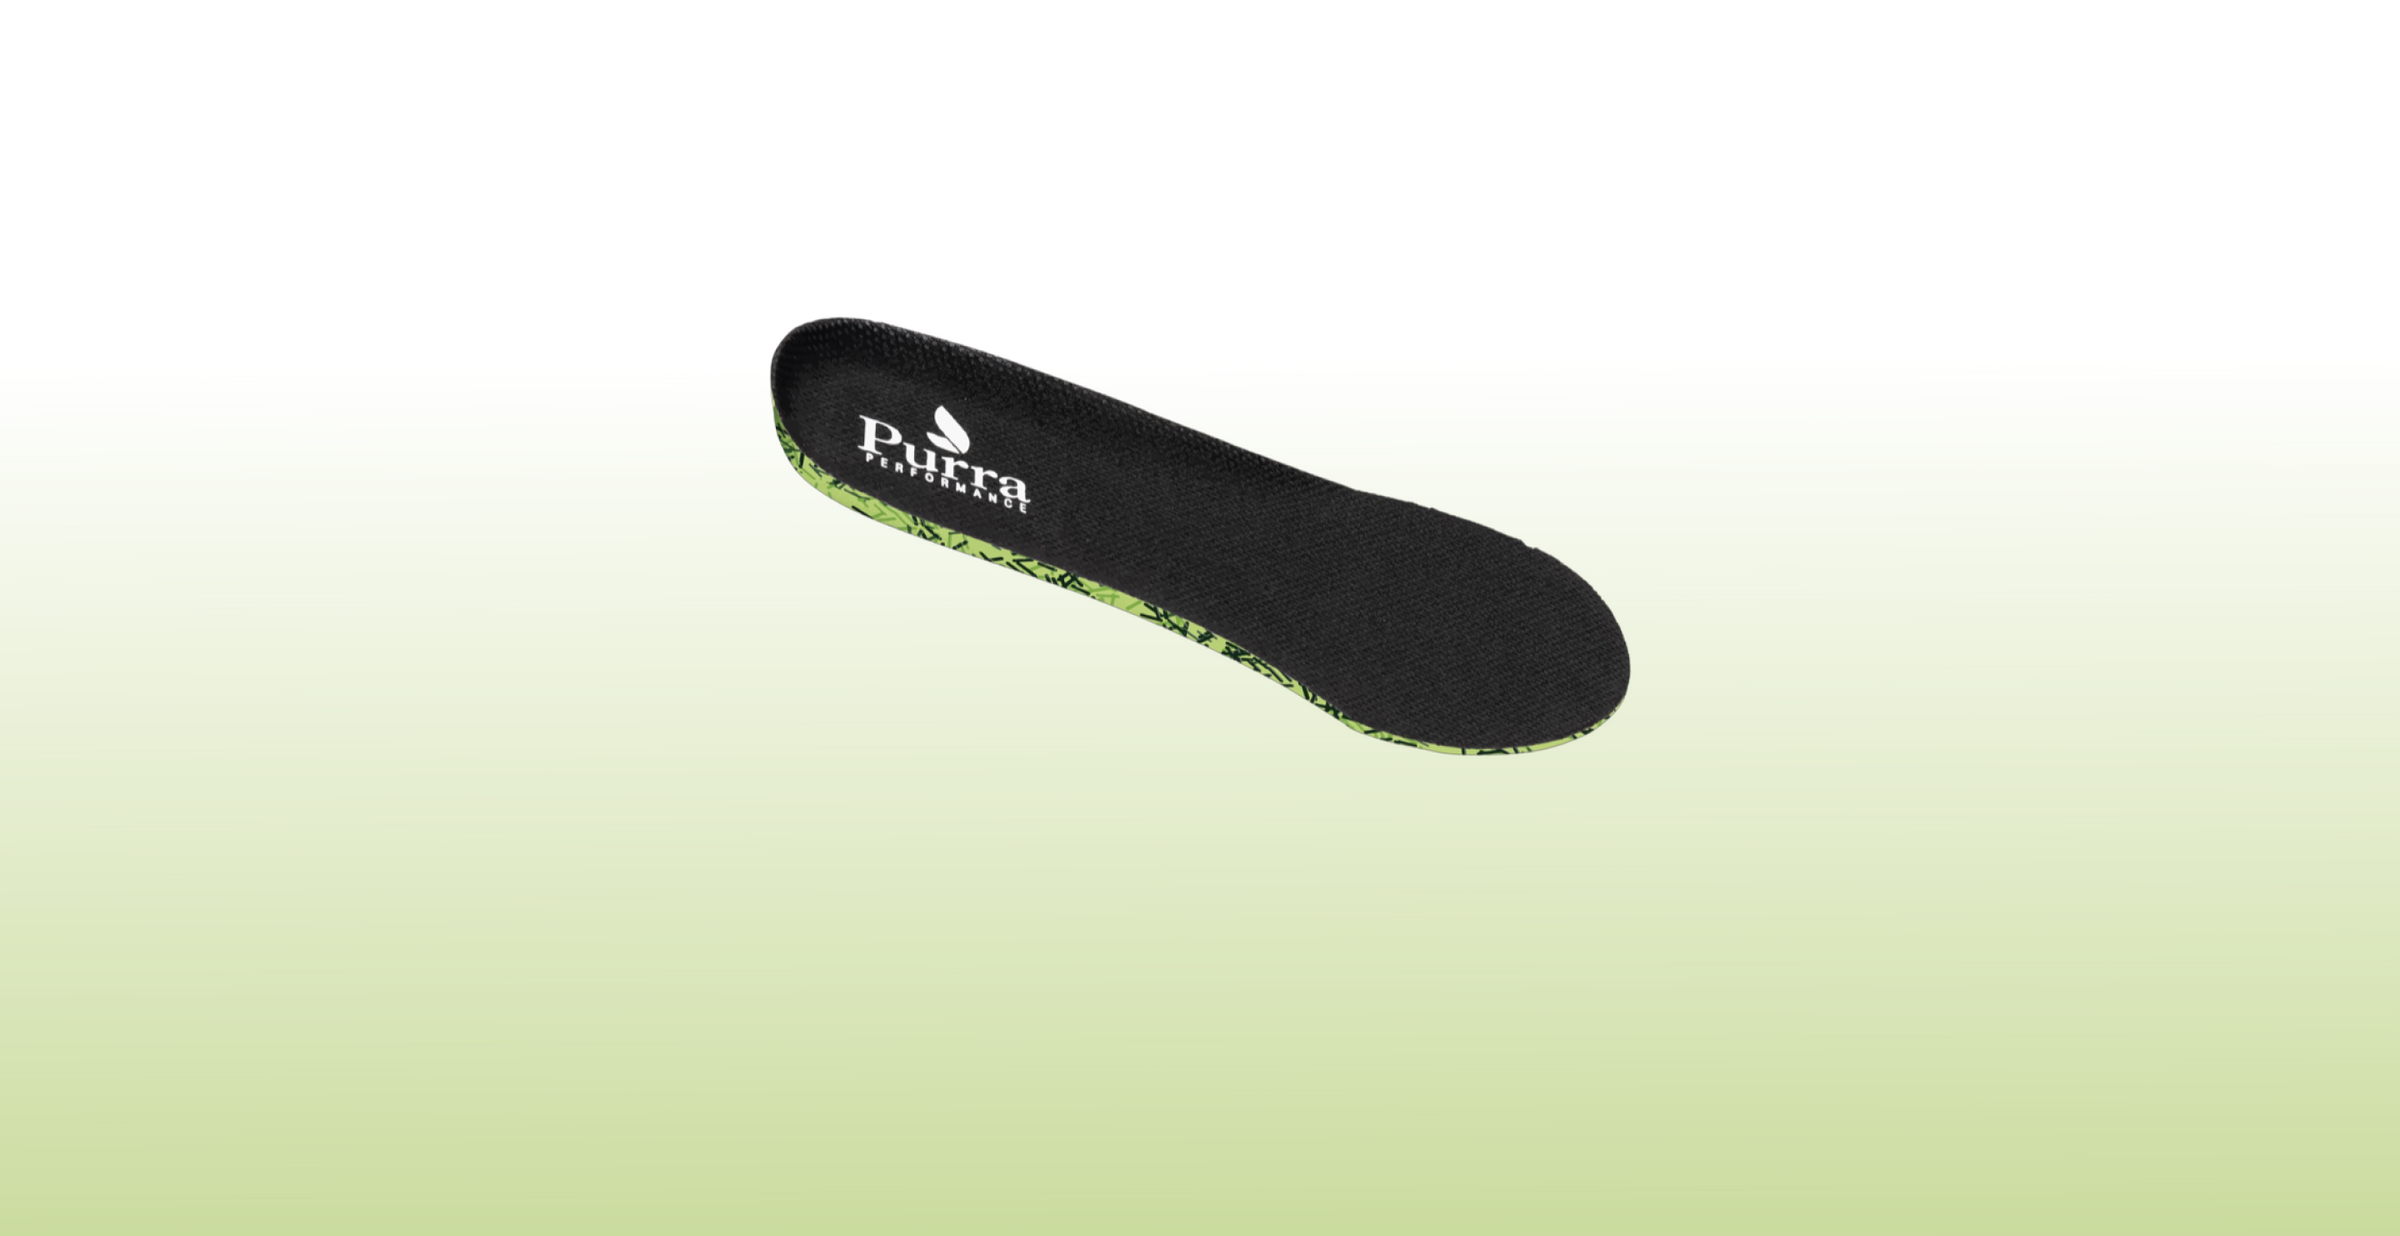 The recycled material EVA/PU insole.  With a black upper and black and green camo style lower, shown on a gradiated white to pale green background.  The Purra logo is shown on the heel area.